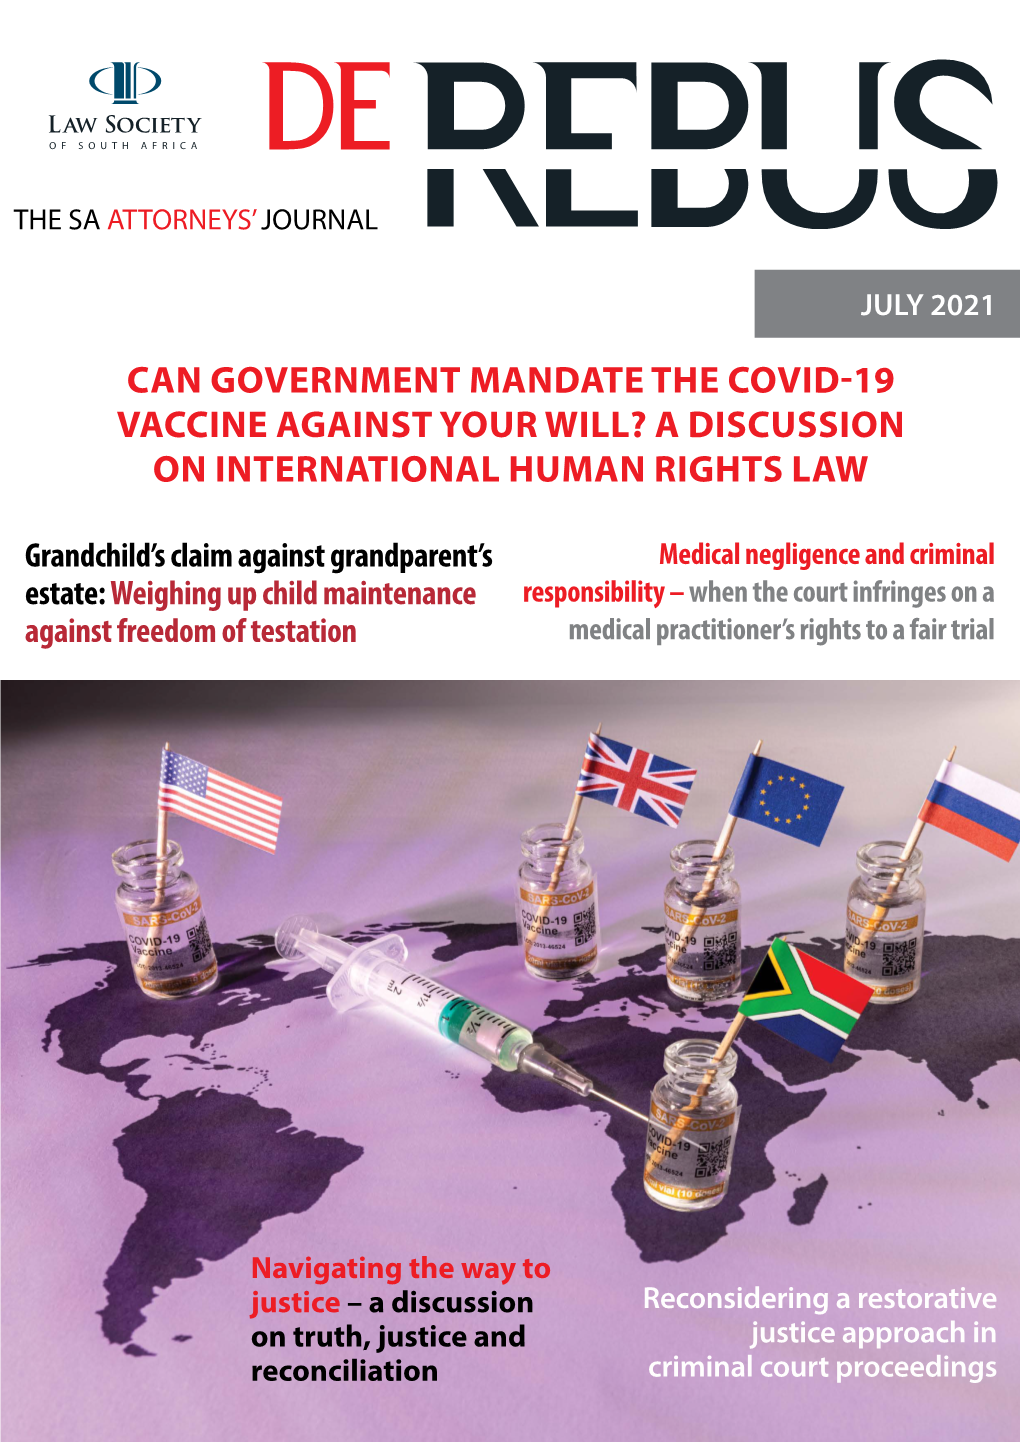 Can Government Mandate the COVID-19 Vaccine Against Your Will? a Discussion on International Human Rights Law